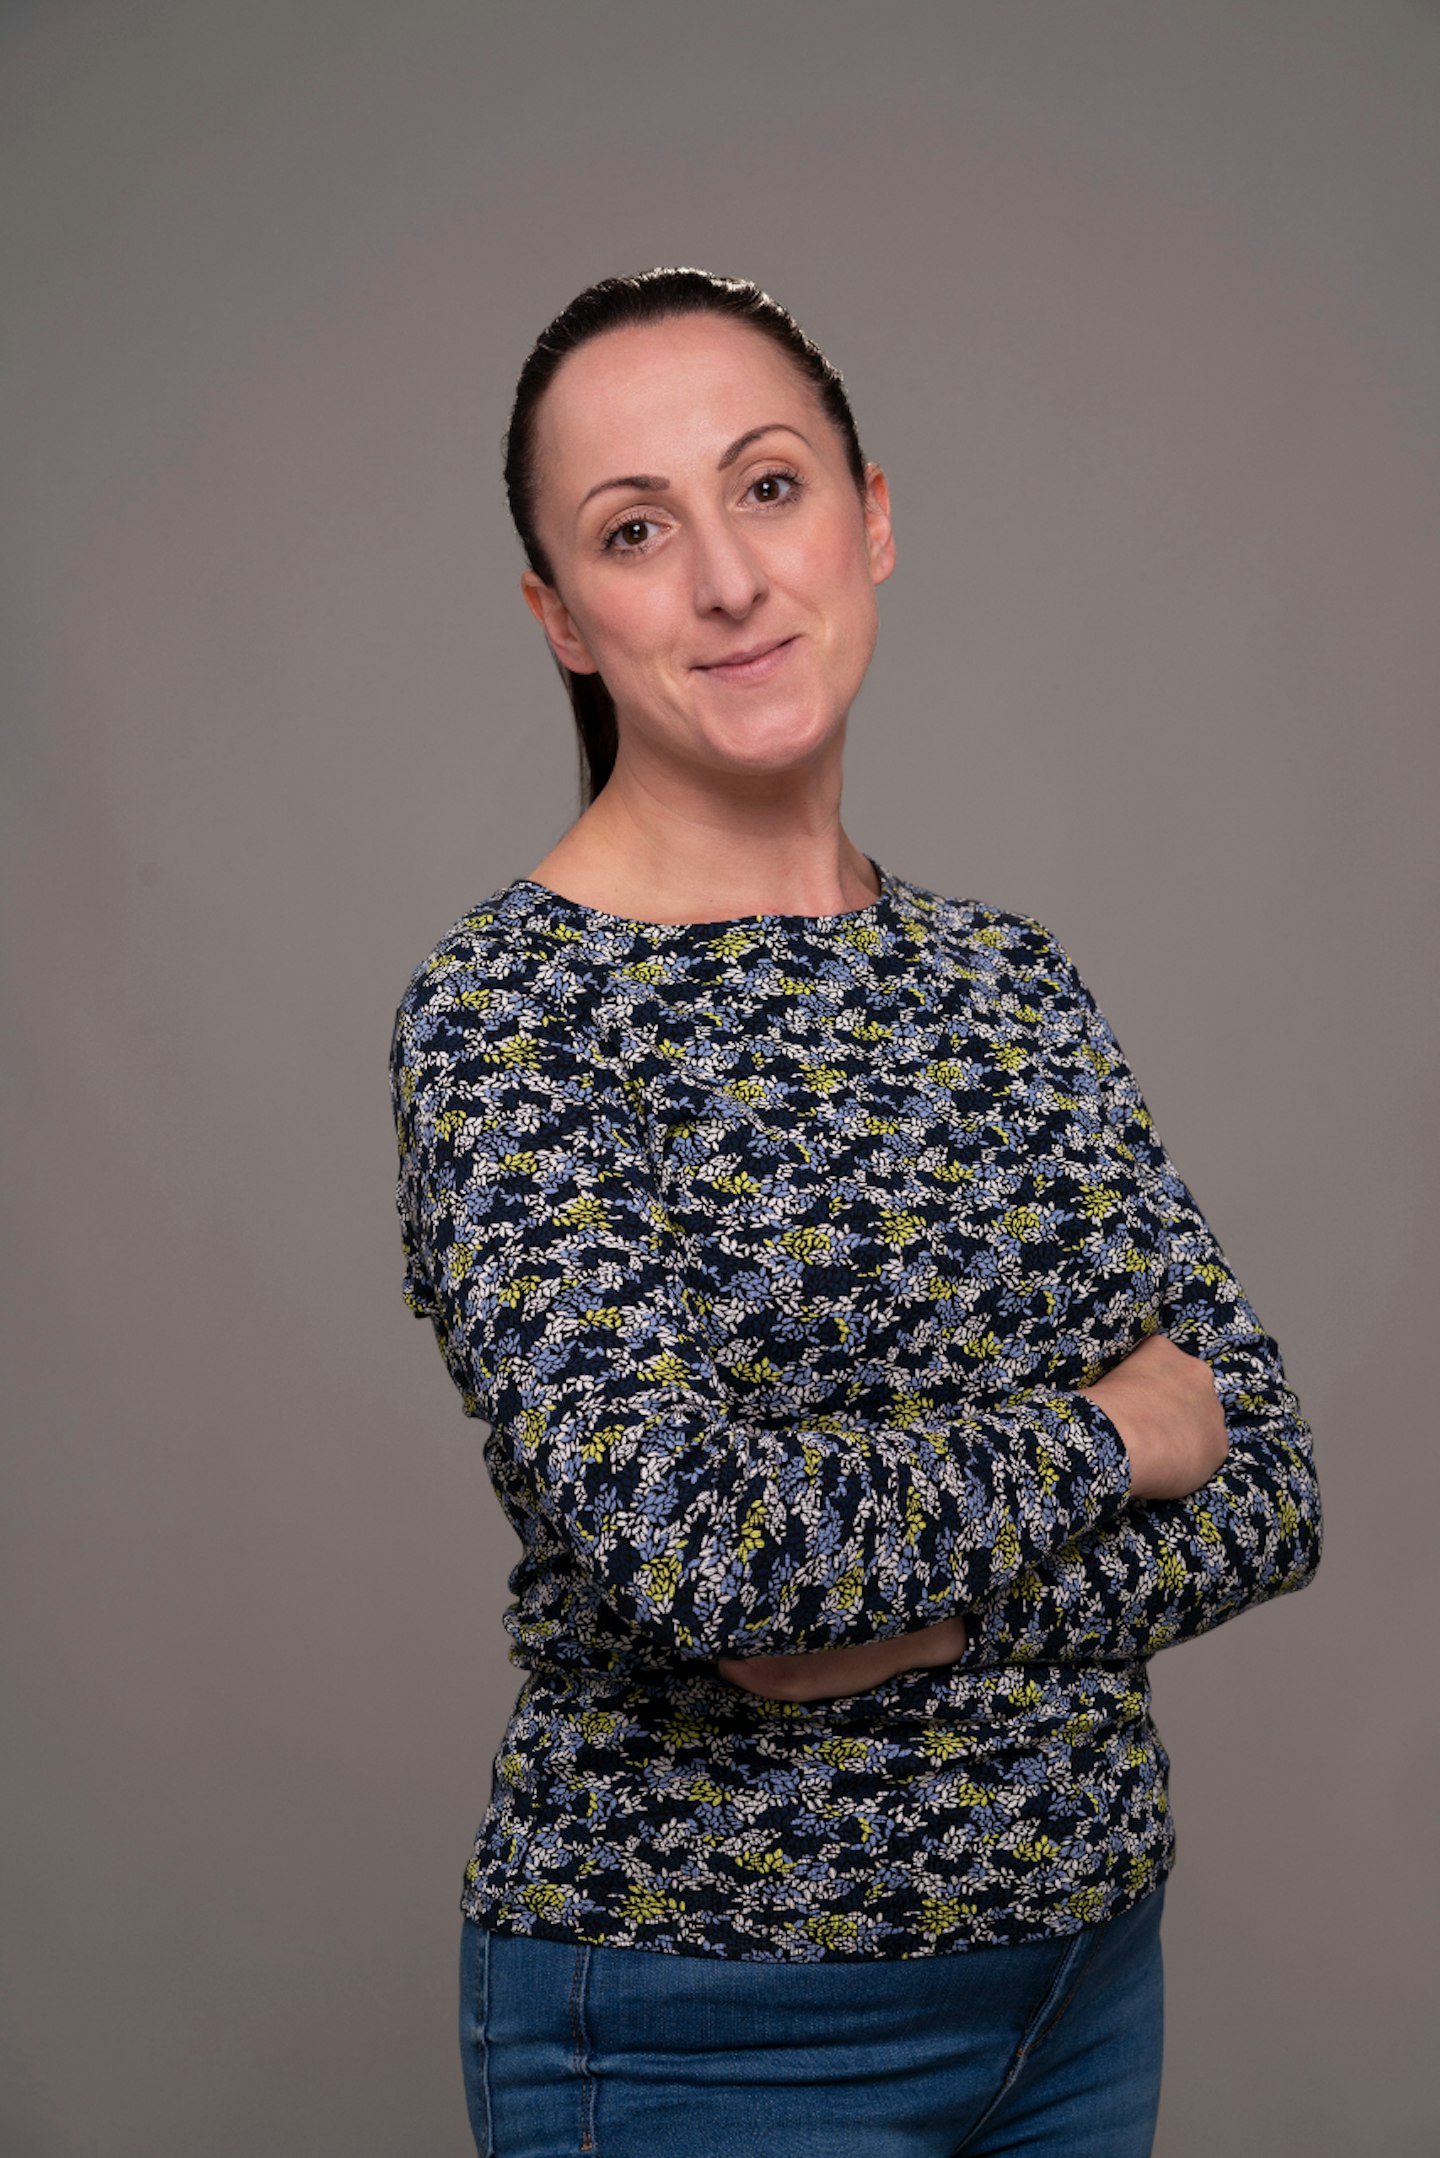 Natalie Cassidy as Sonia Fowler on EastEnders